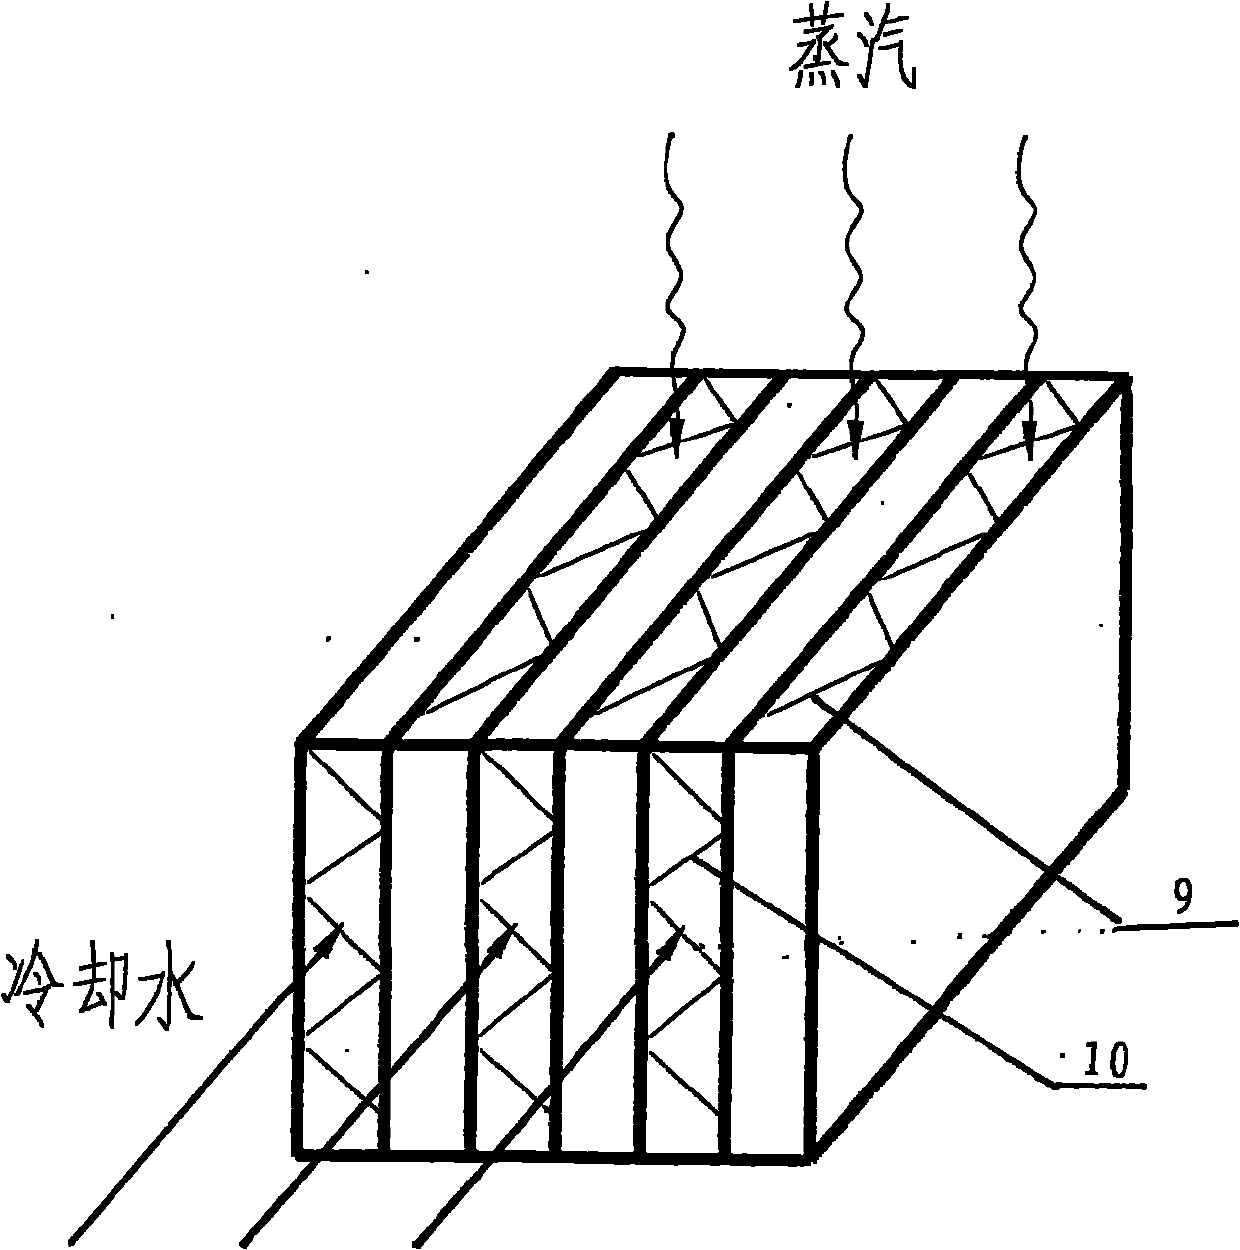 Surface-type indirect air cooling system plate-type condenser of thermal power plant